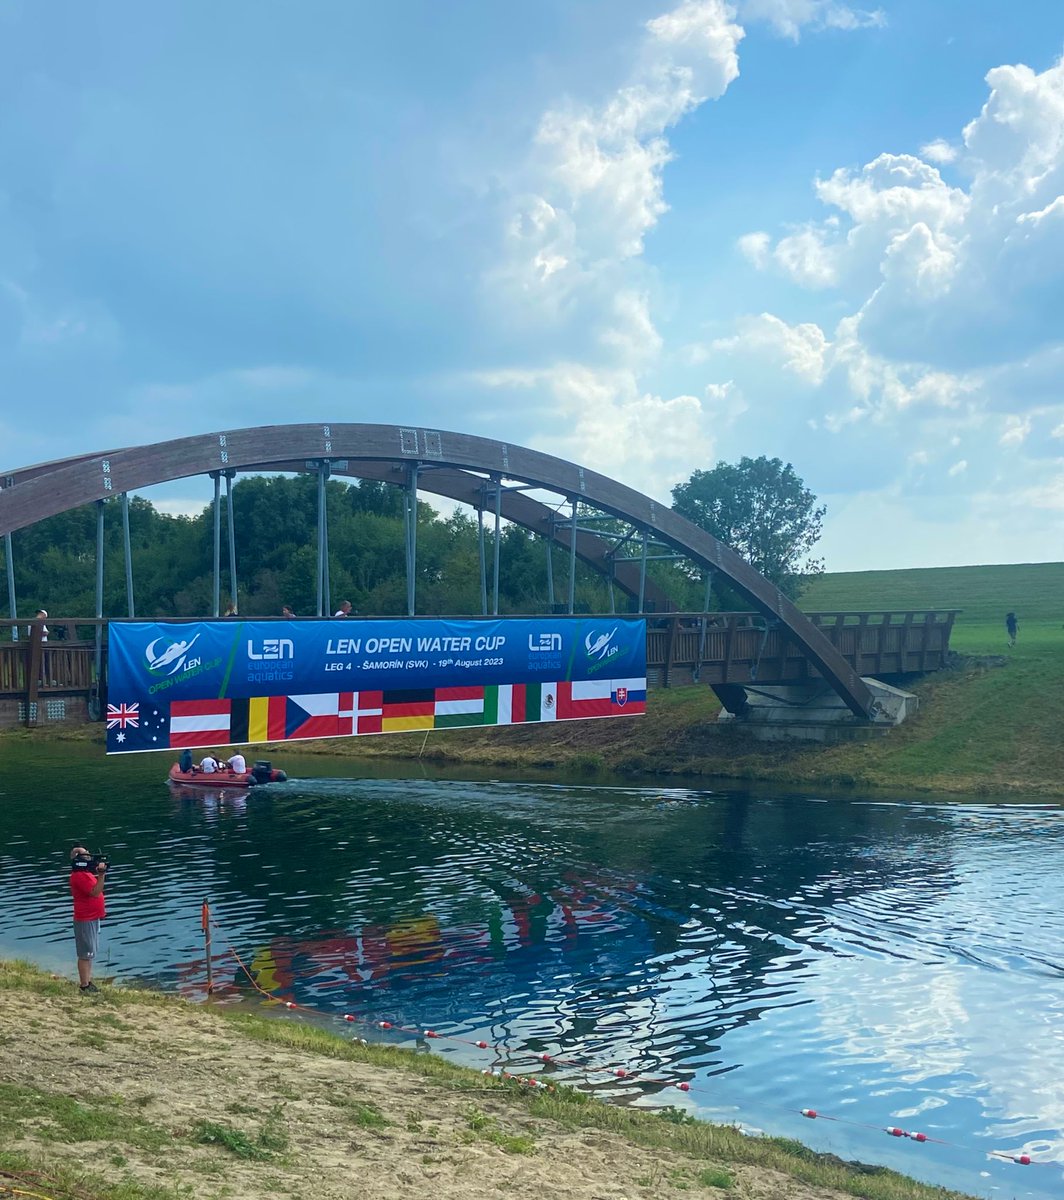 Very excited to be here in Slovakia with @LENaquatics getting ready for the 4th Leg of the 2023 Open Water Cup on Saturday! Looking forward to working with all of the teams and swimmers 🏊‍♂️